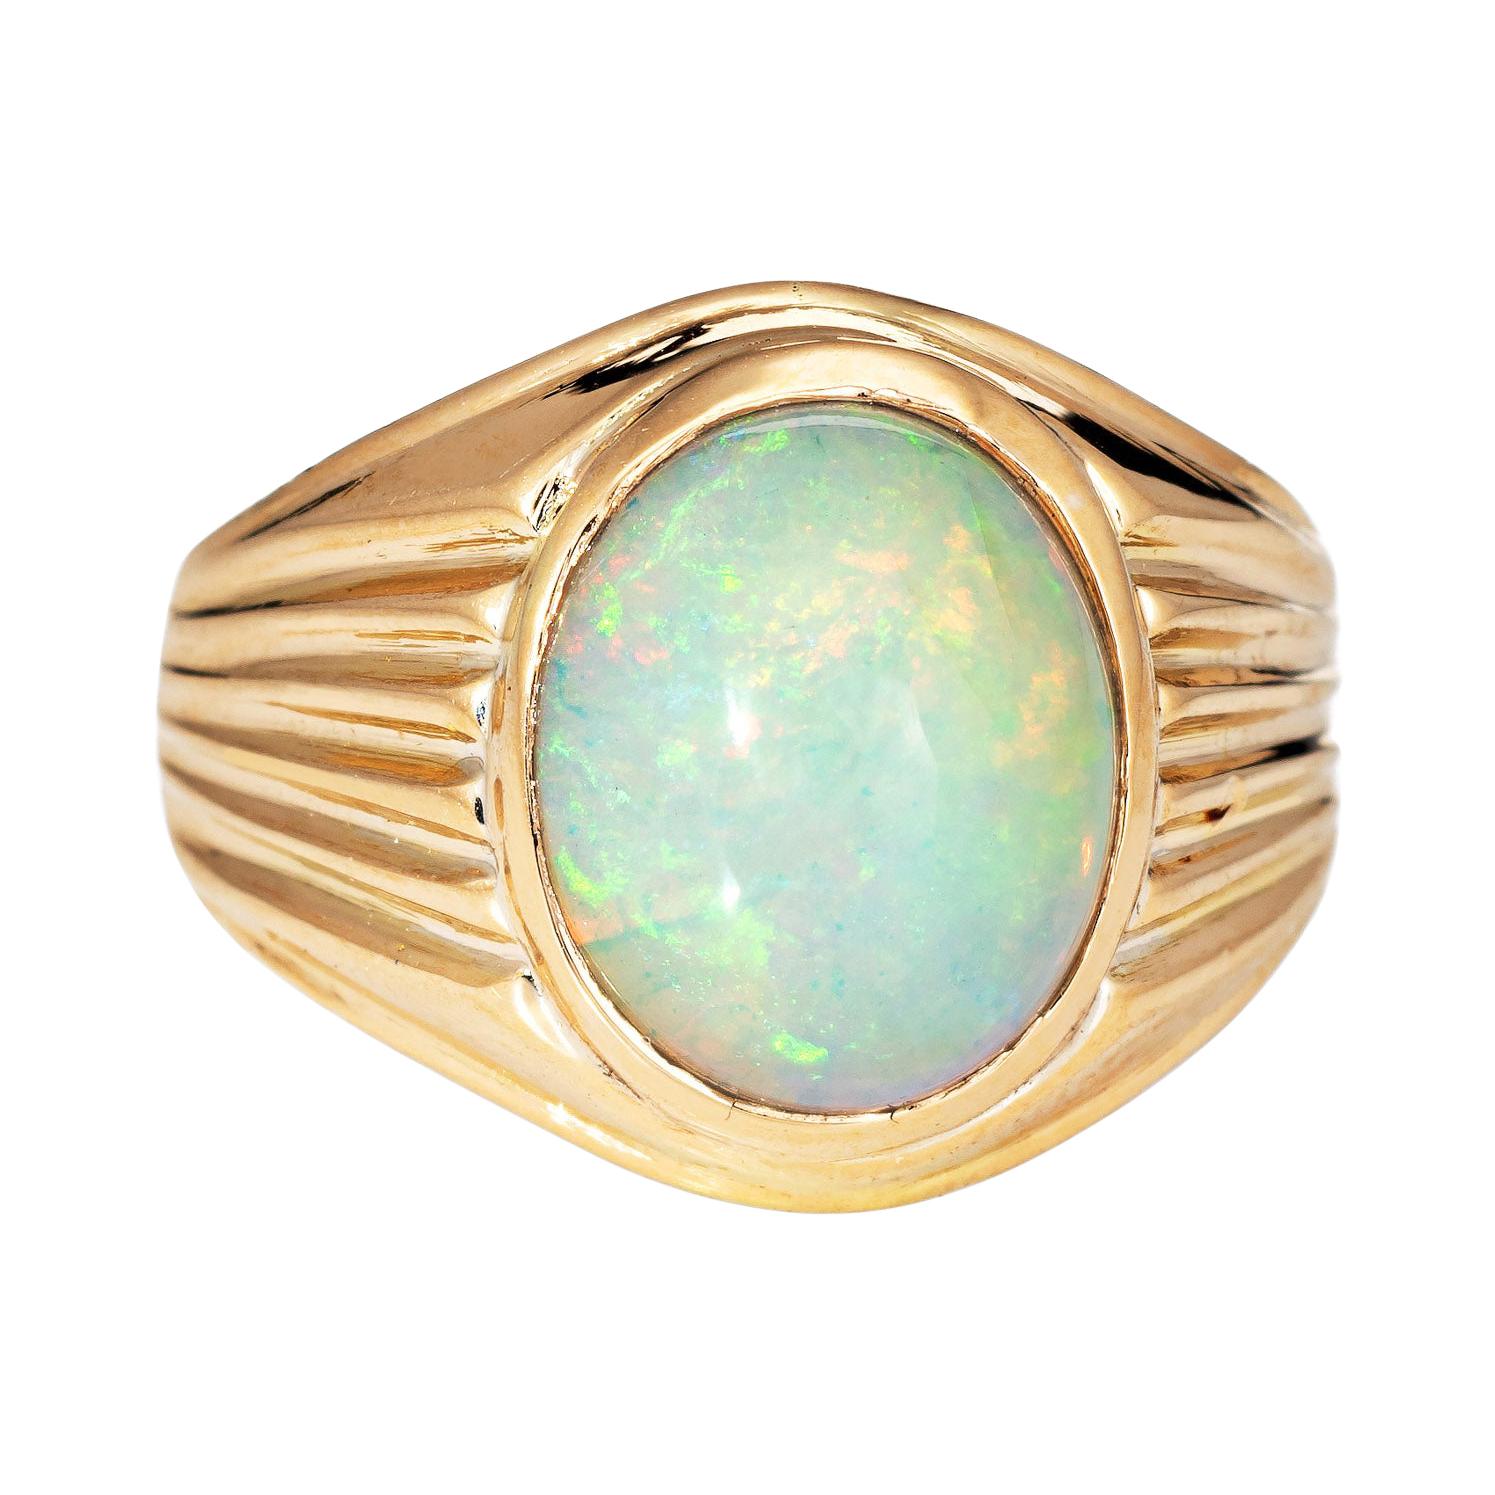 Vintage 5.50ct Opal Ring 18k Yellow Gold Mens Signet Estate Fine Jewelry